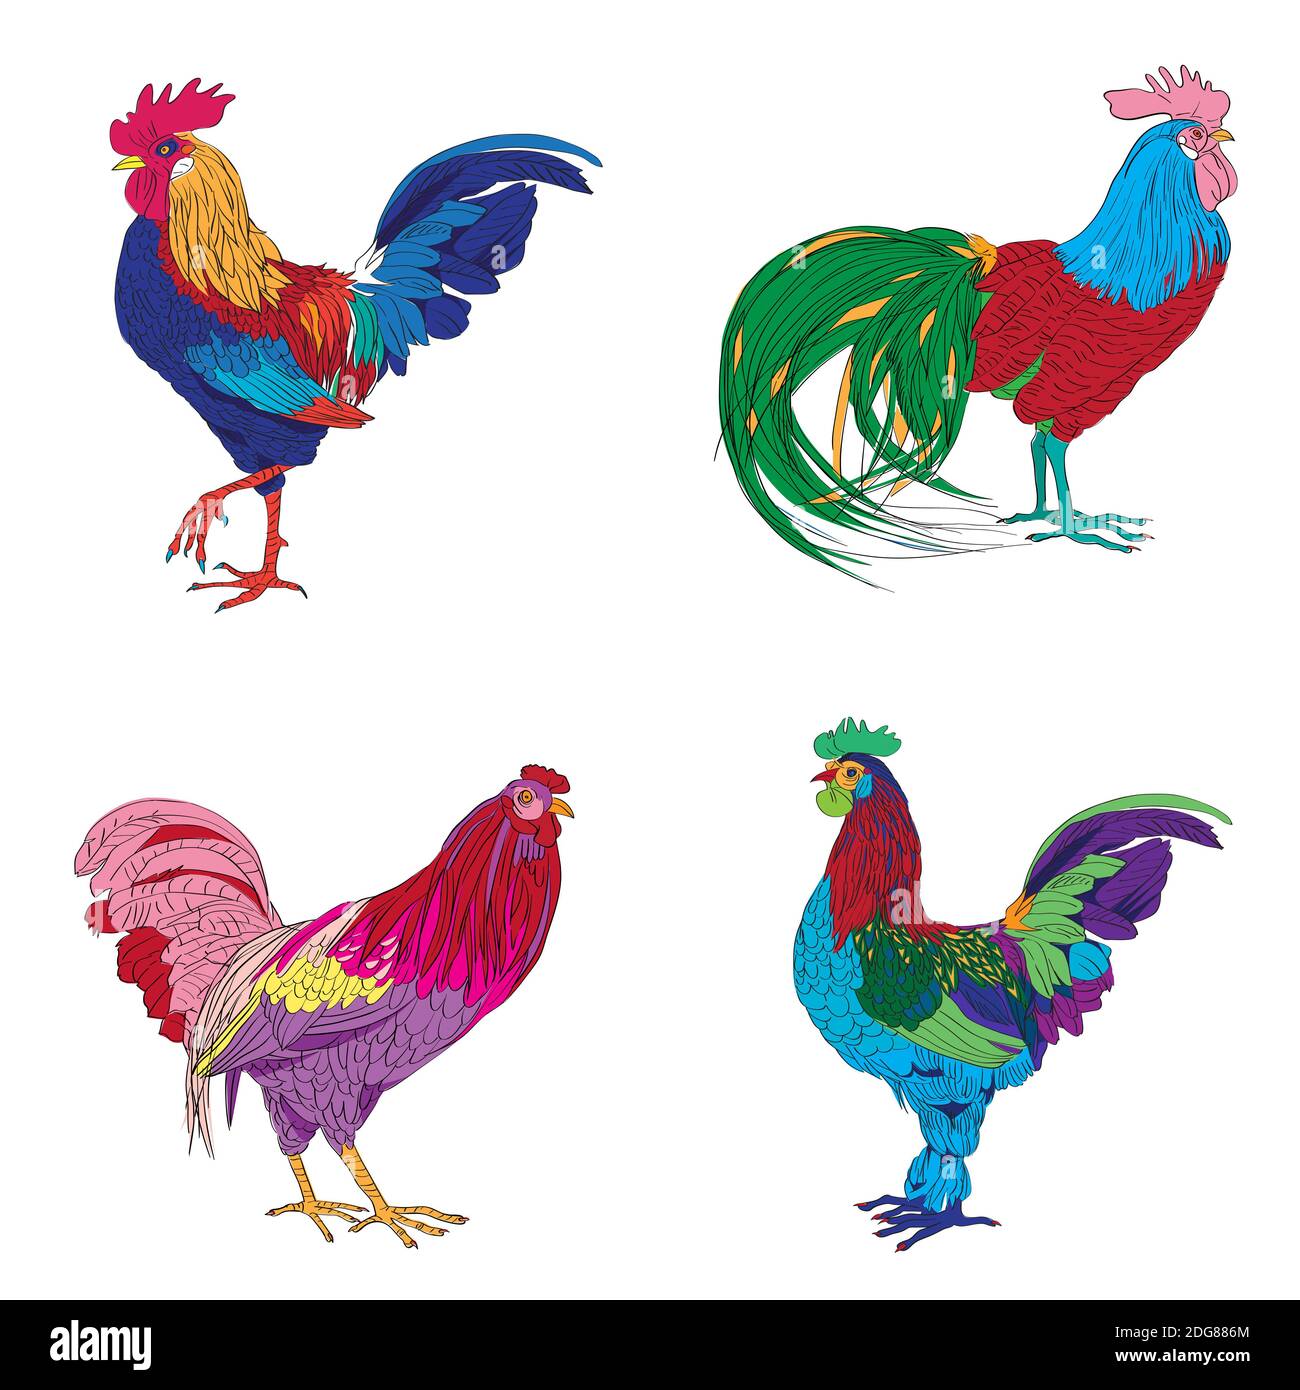 Four roosters series Stock Photo